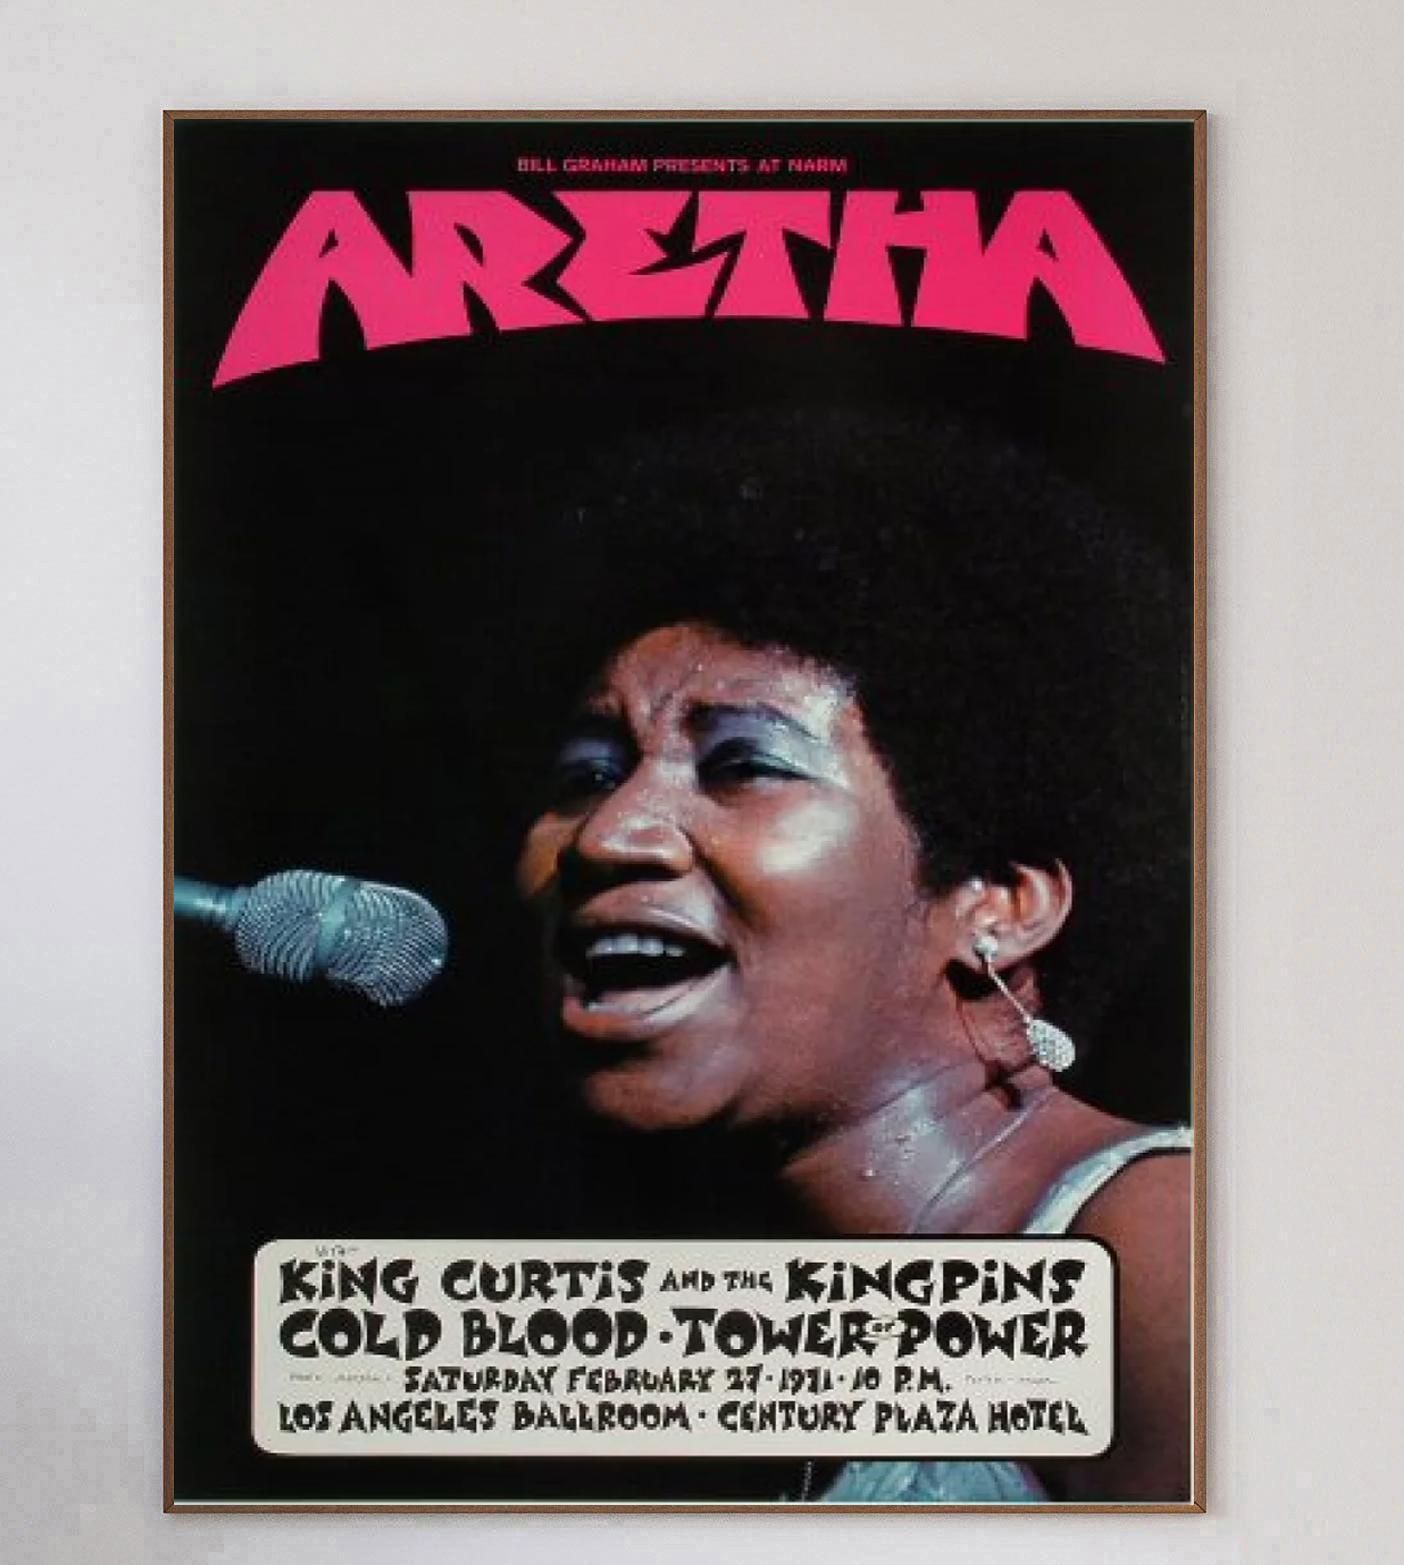 Designed by legendary concert poster artist David Singer with Jim Marshall, this beautiful poster was created in 1971 to promote a live concert of Aretha Franklin at the Los Angeles Ballroom in California. Bill Graham events such as this were well